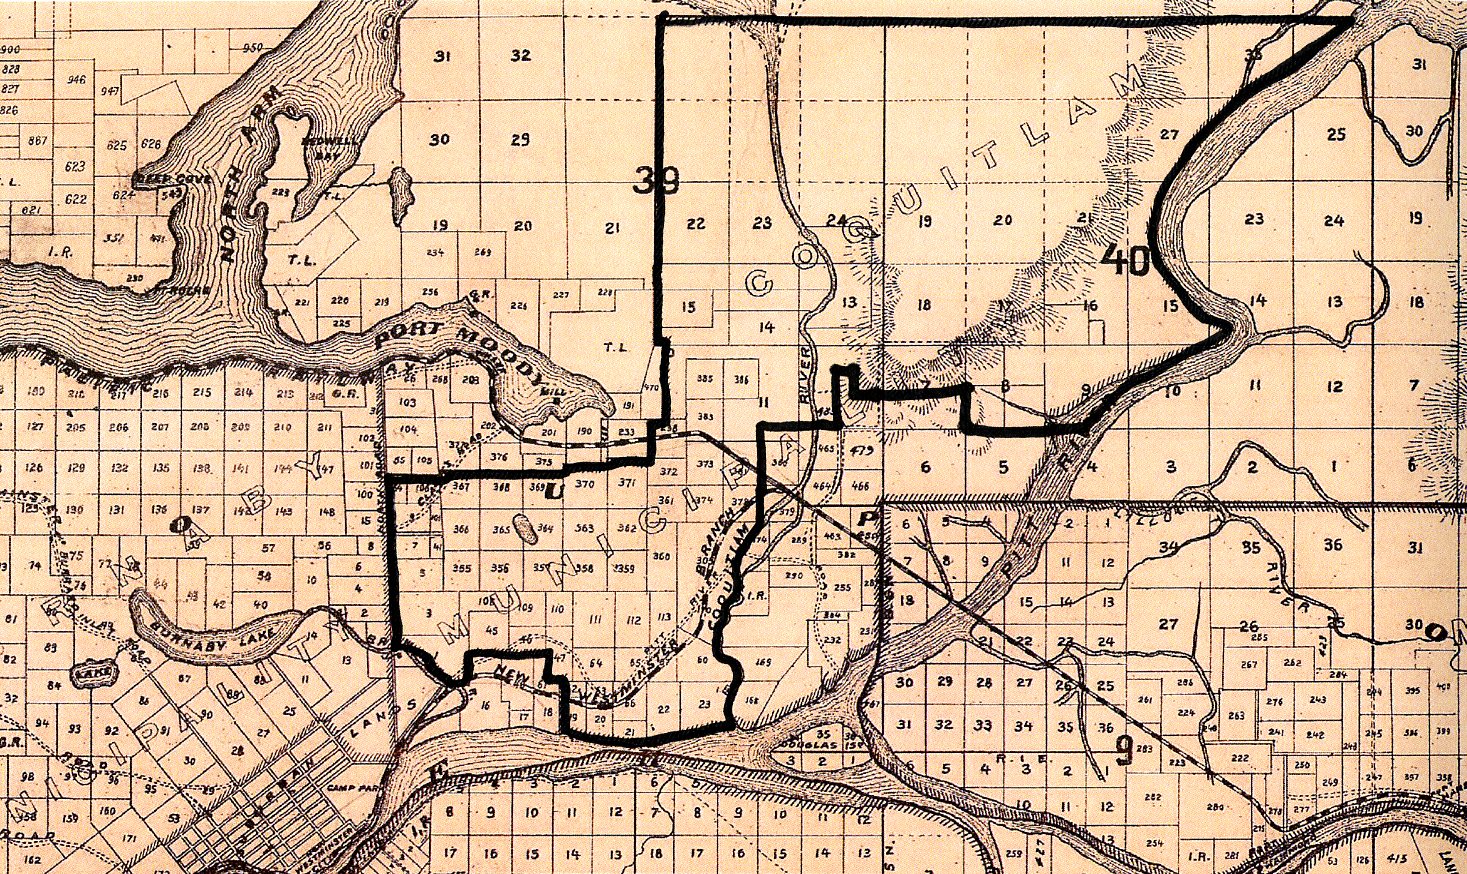 Coquitlam's 1913 Boundaries Drawn on a Map of New Westminster District from 1892 (JPG) Opens in new window